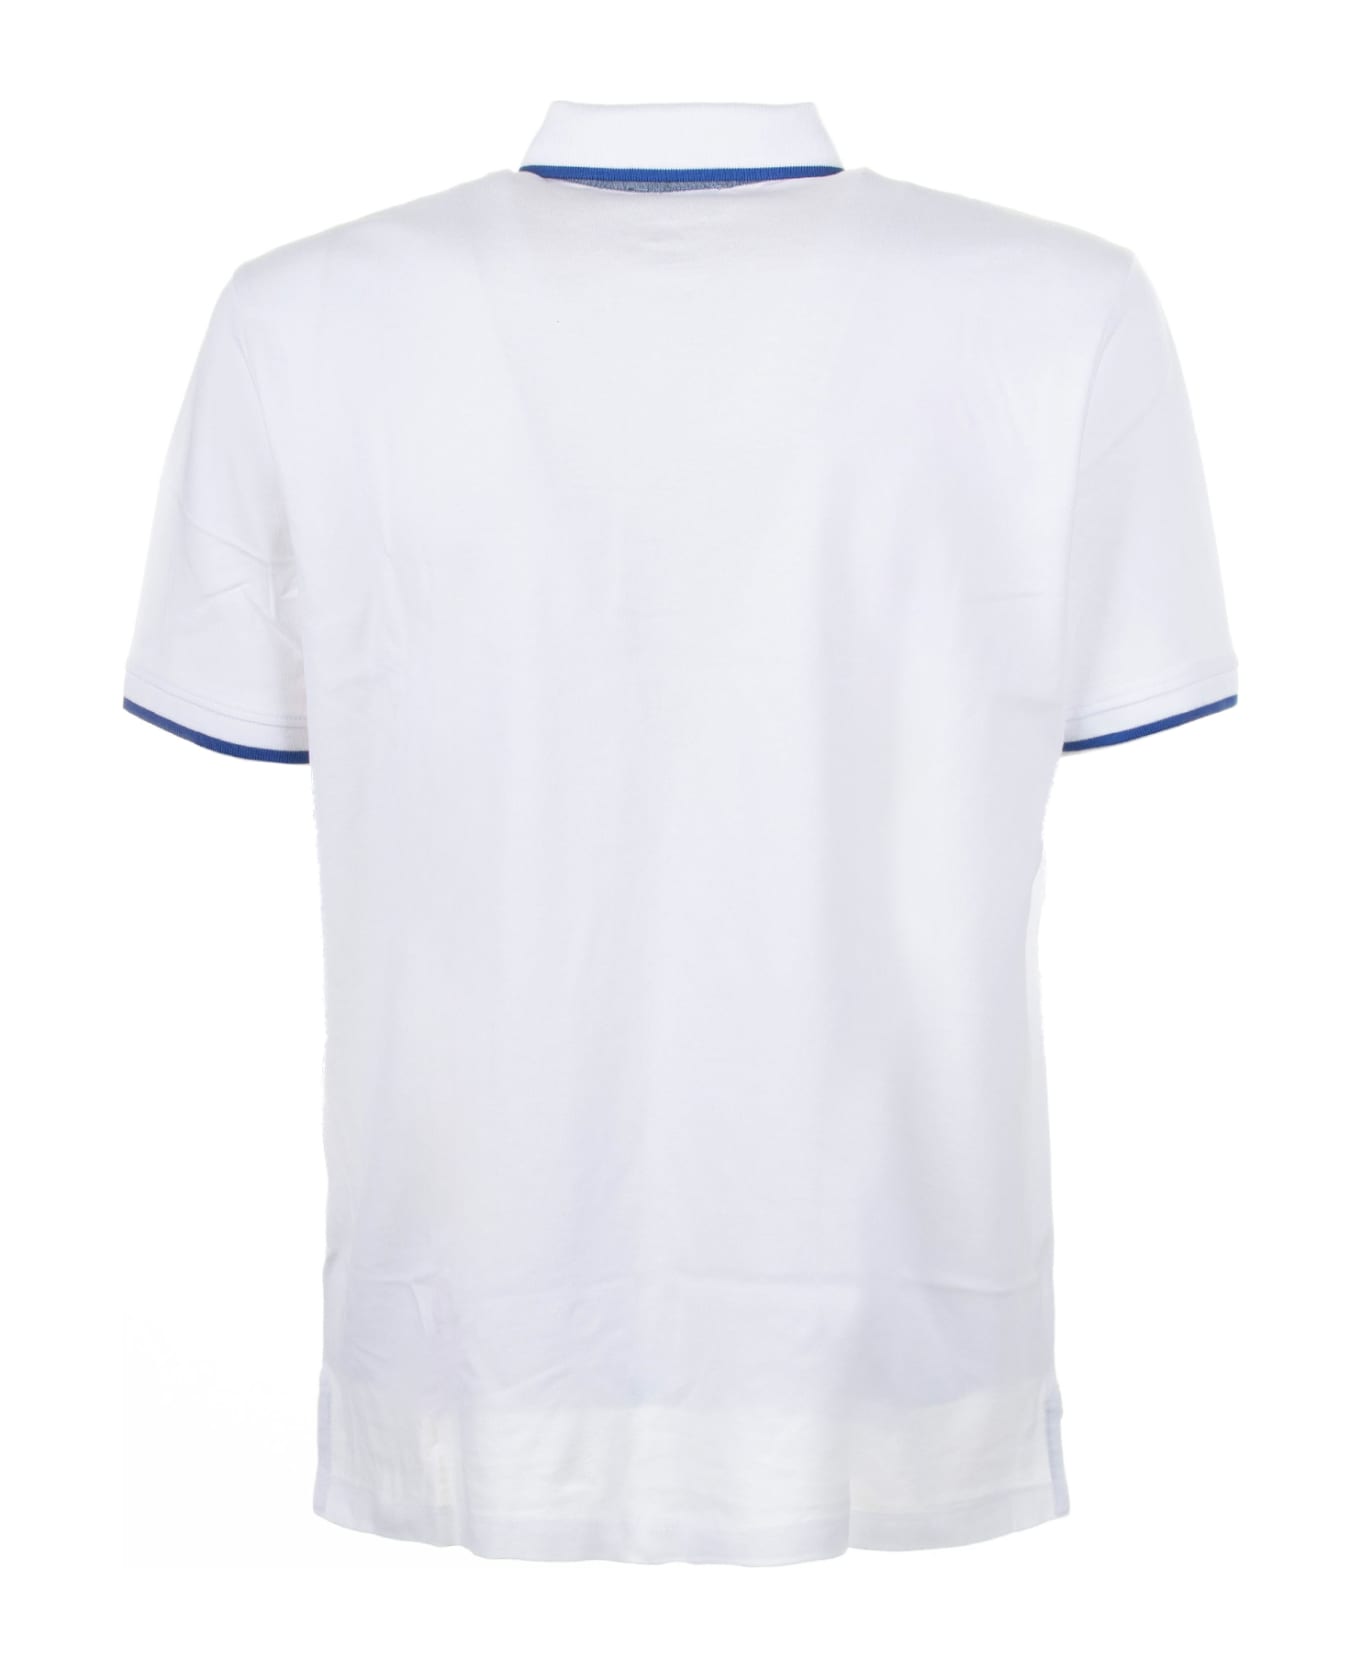 Blauer White Short-sleeved Polo Shirt With Inserts - BIANCO OTTICO ポロシャツ